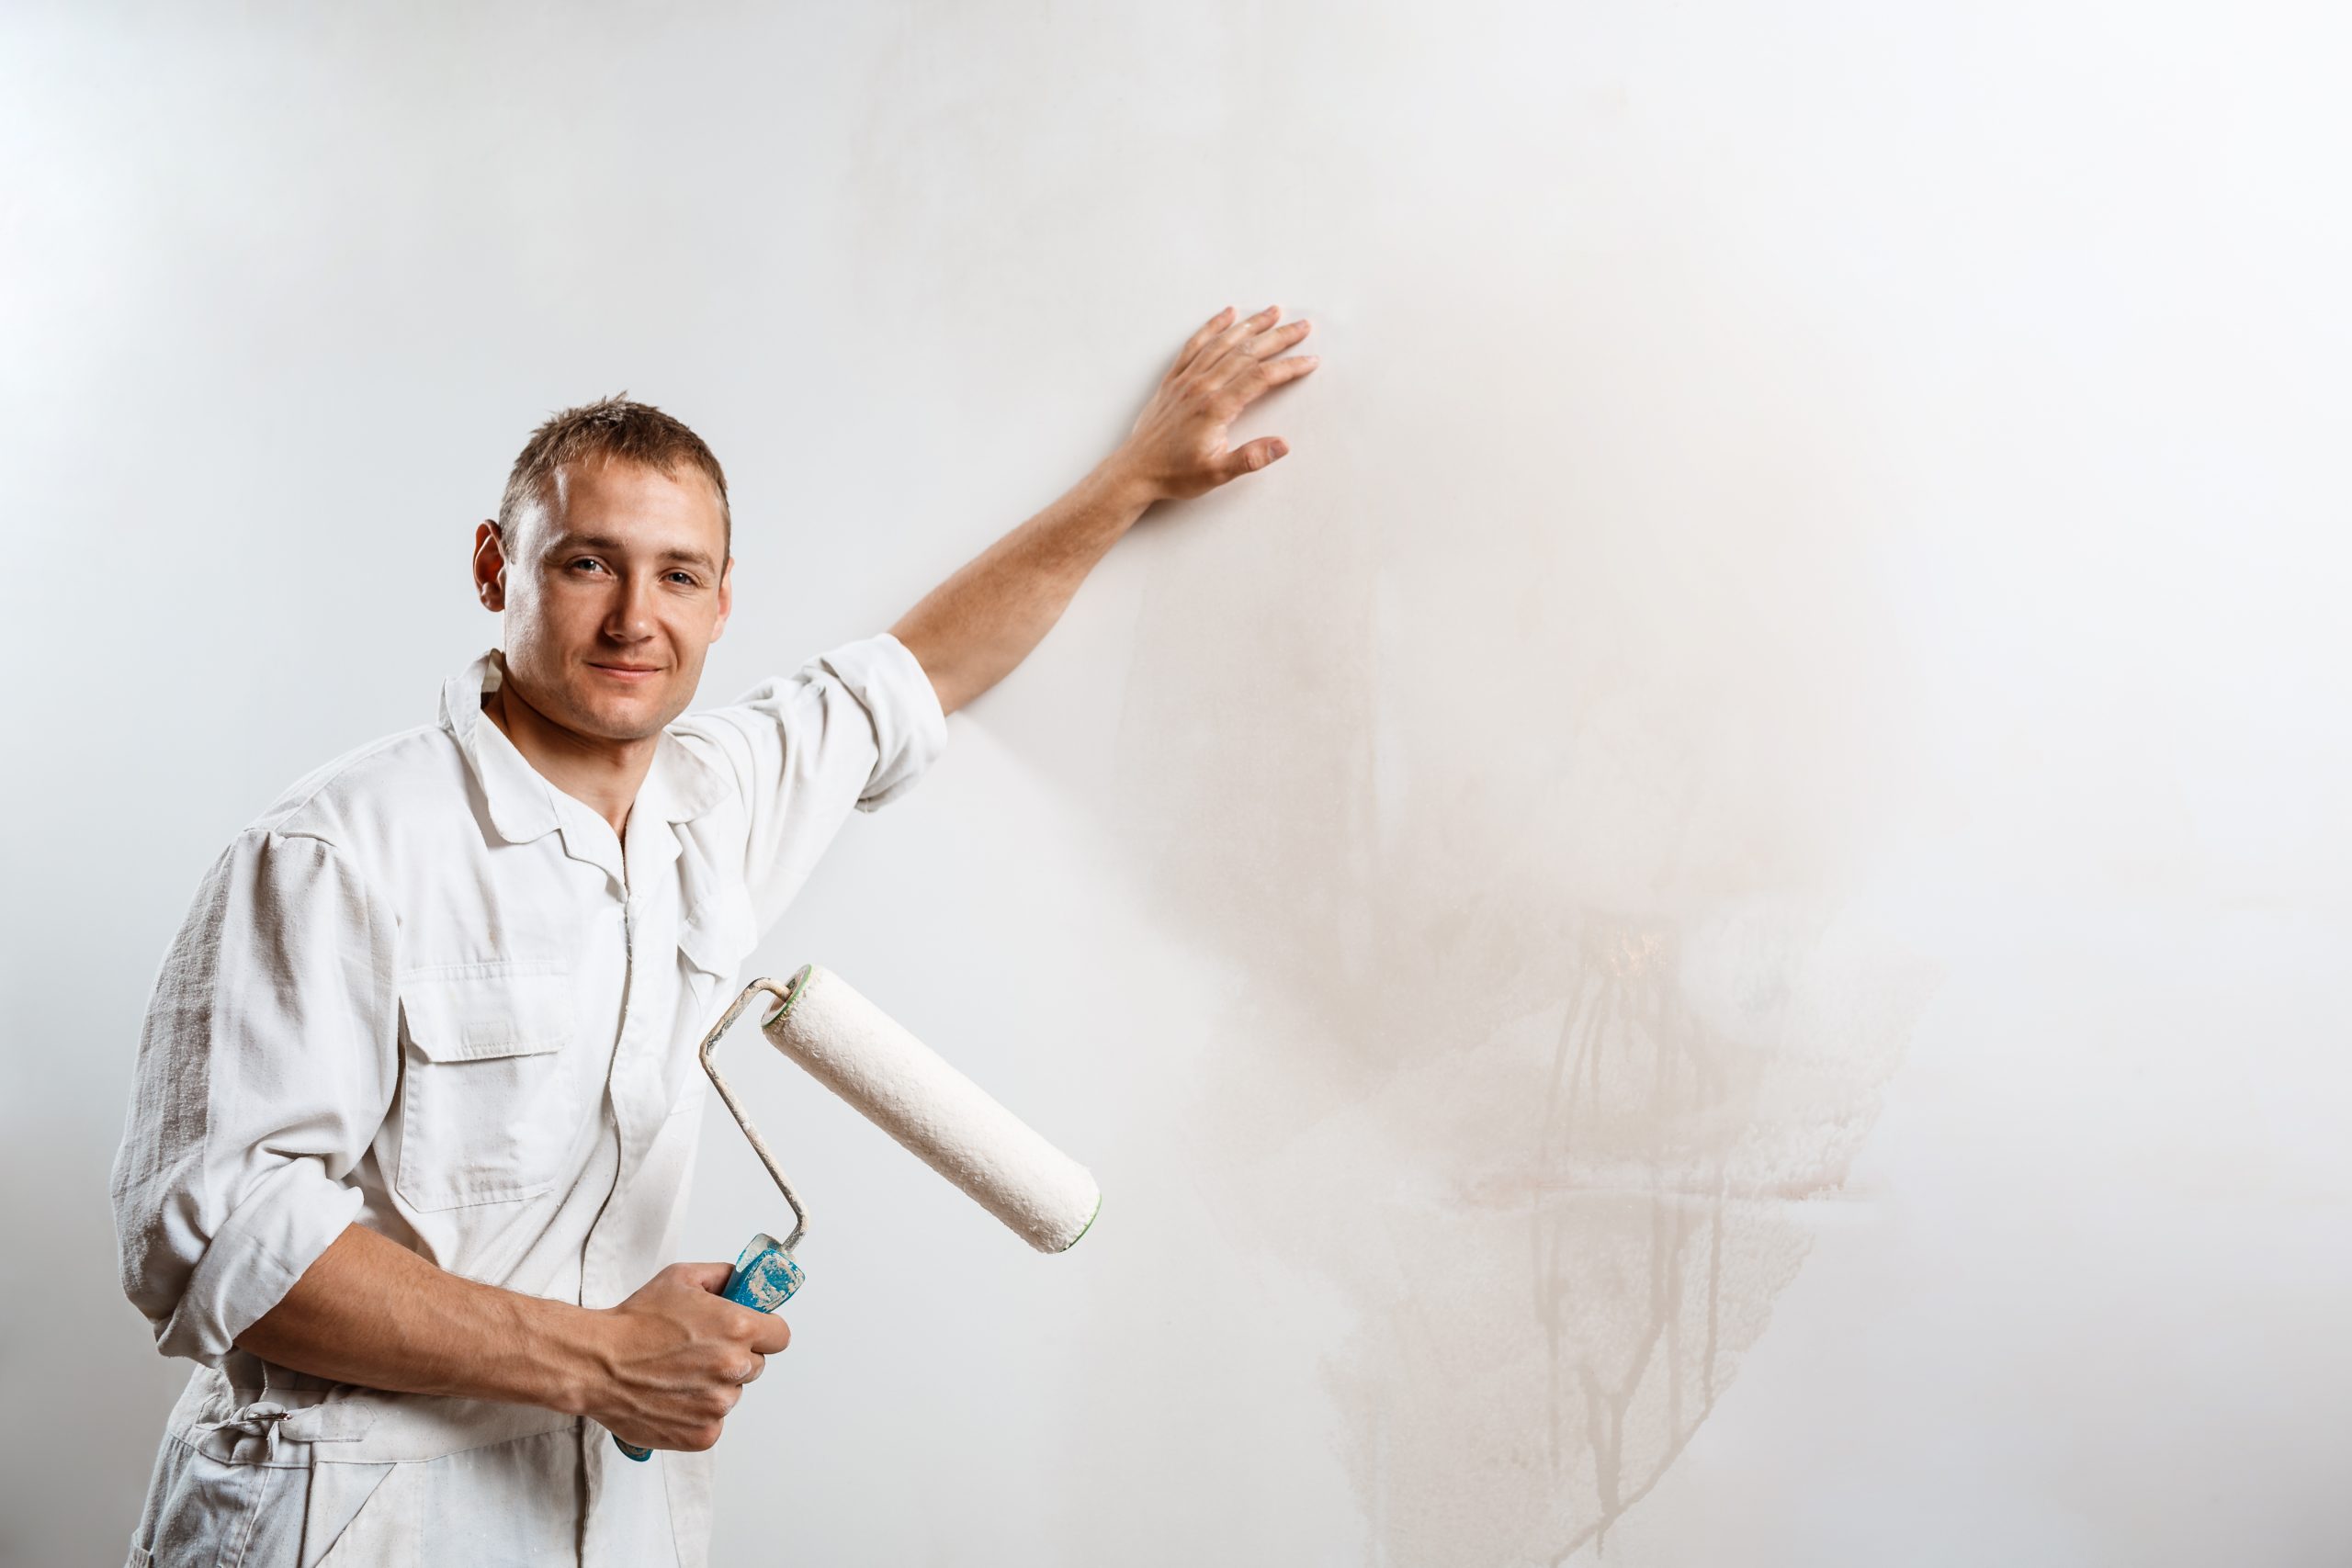 Professional worker looking at camera, holding roller over white wall. Copy space.